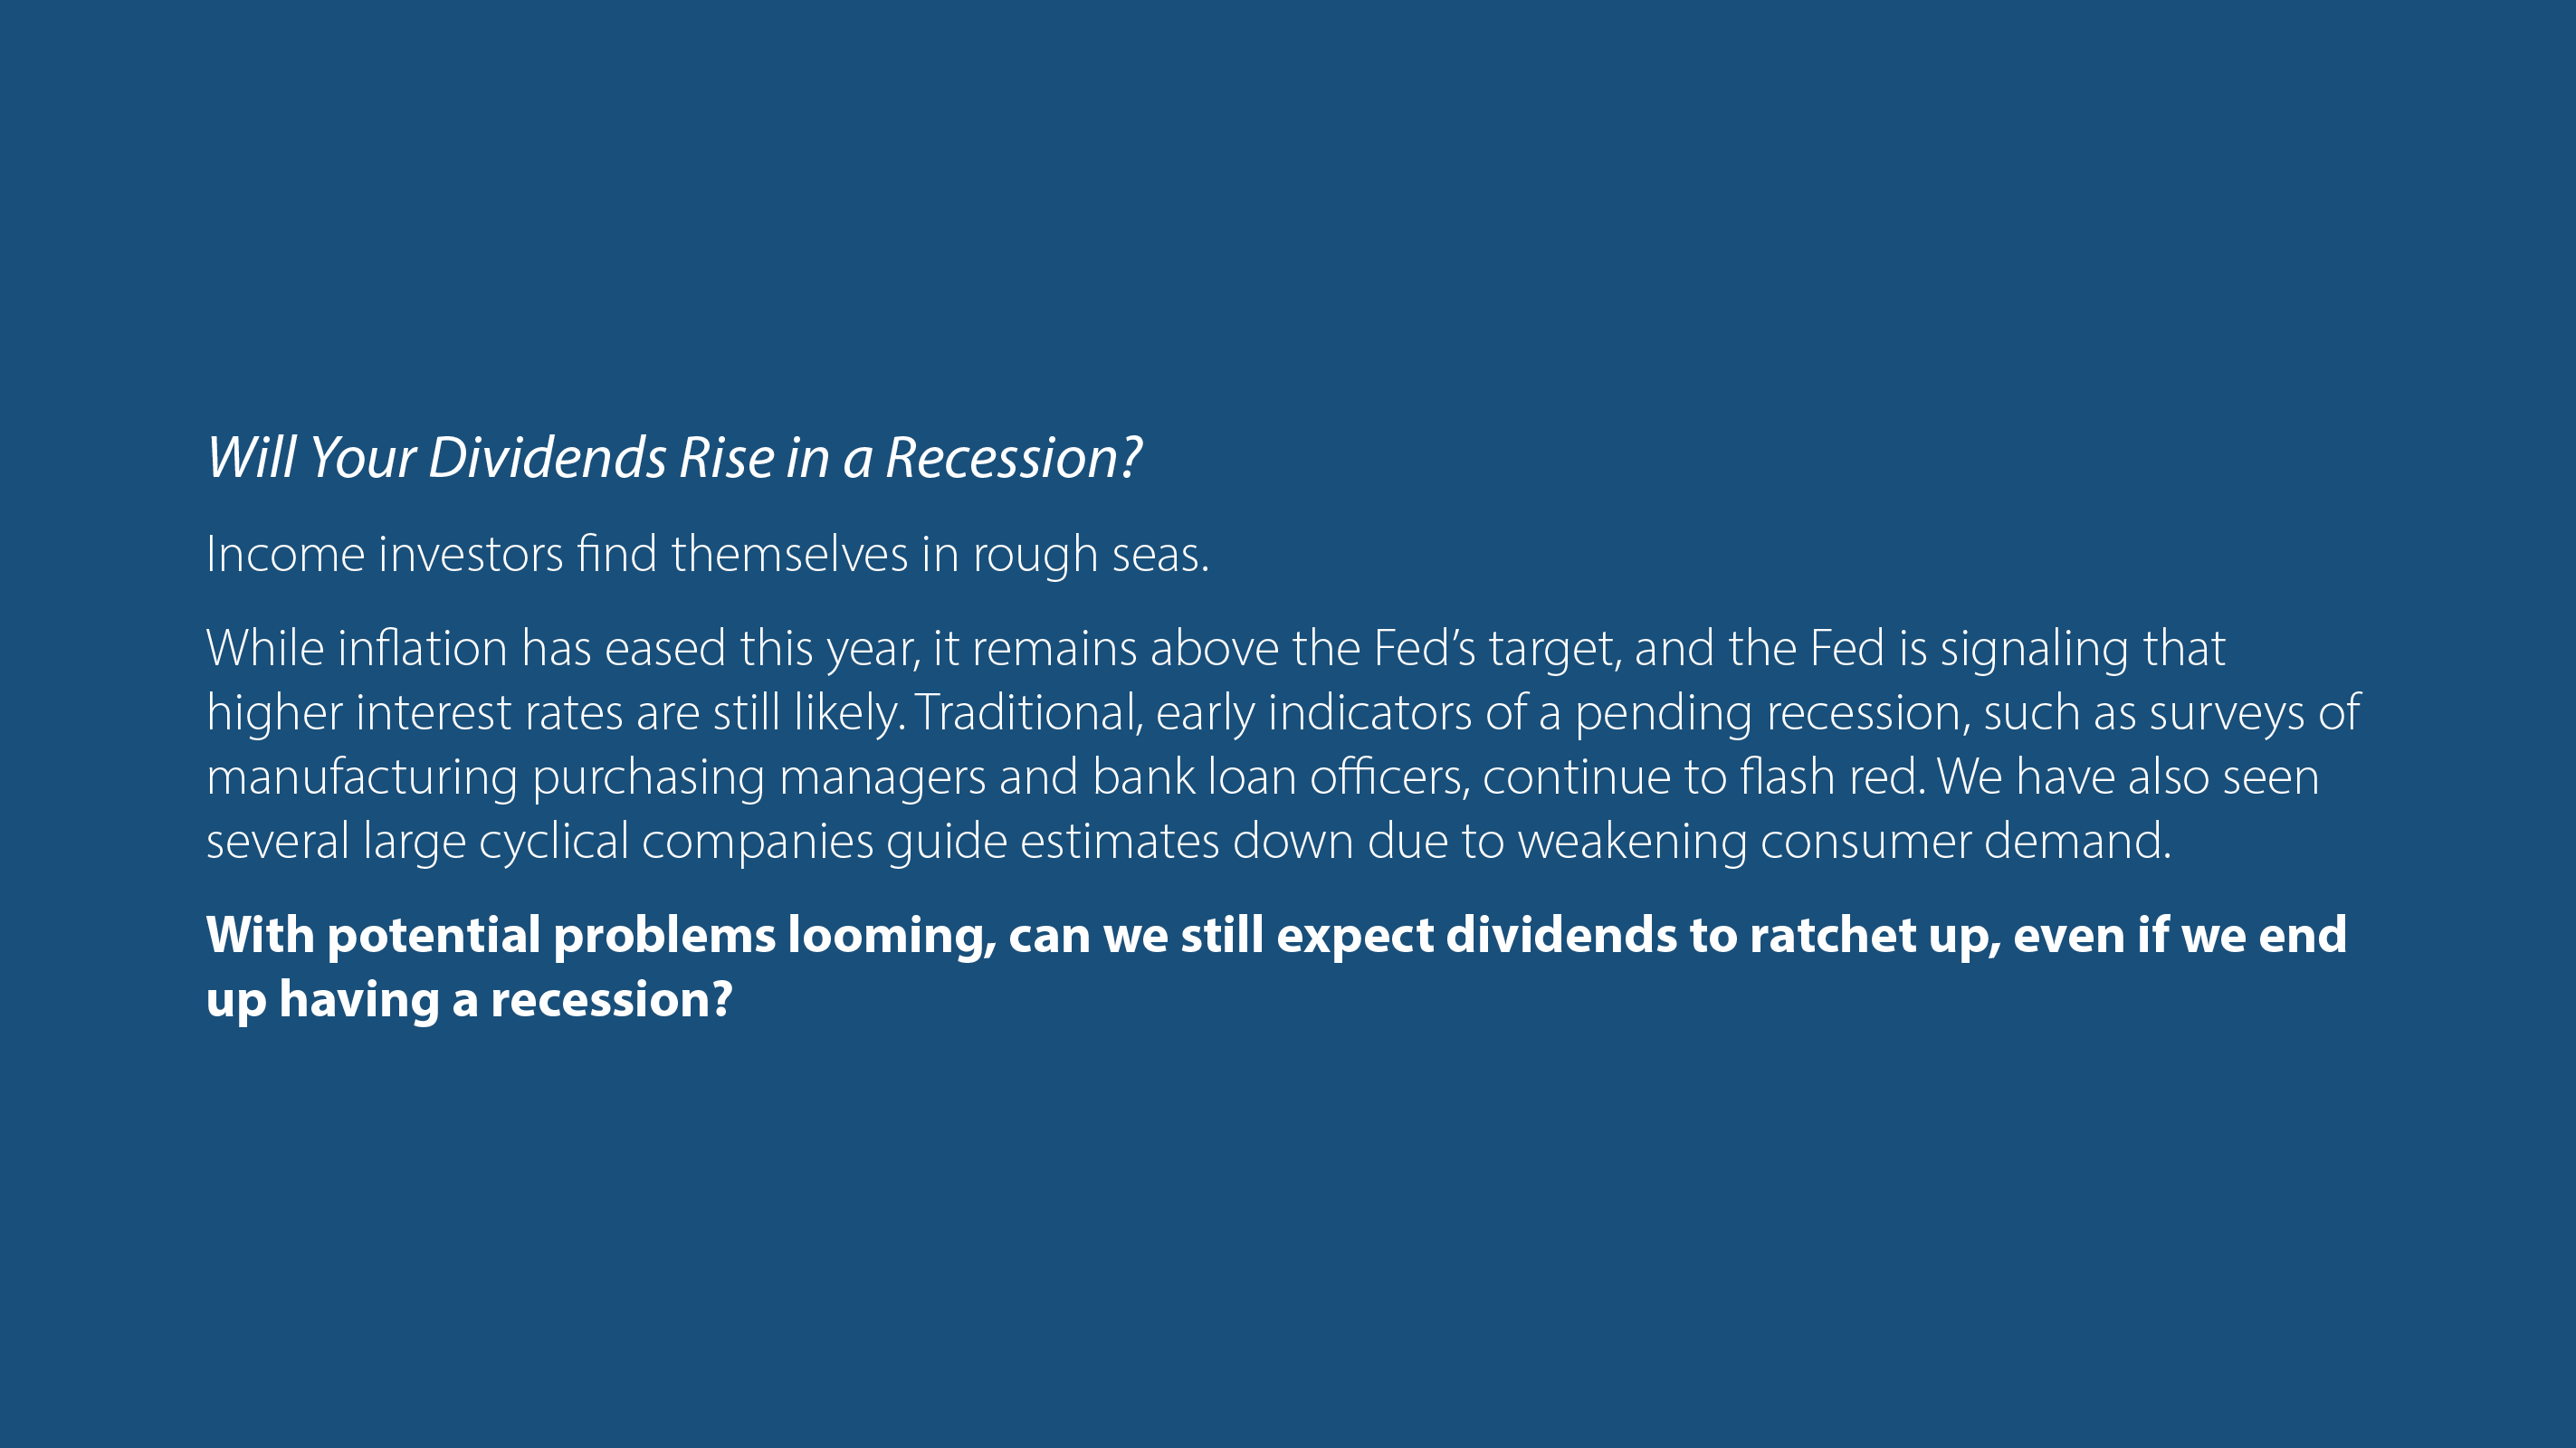 Will Your Dividends Rise in a Recession?